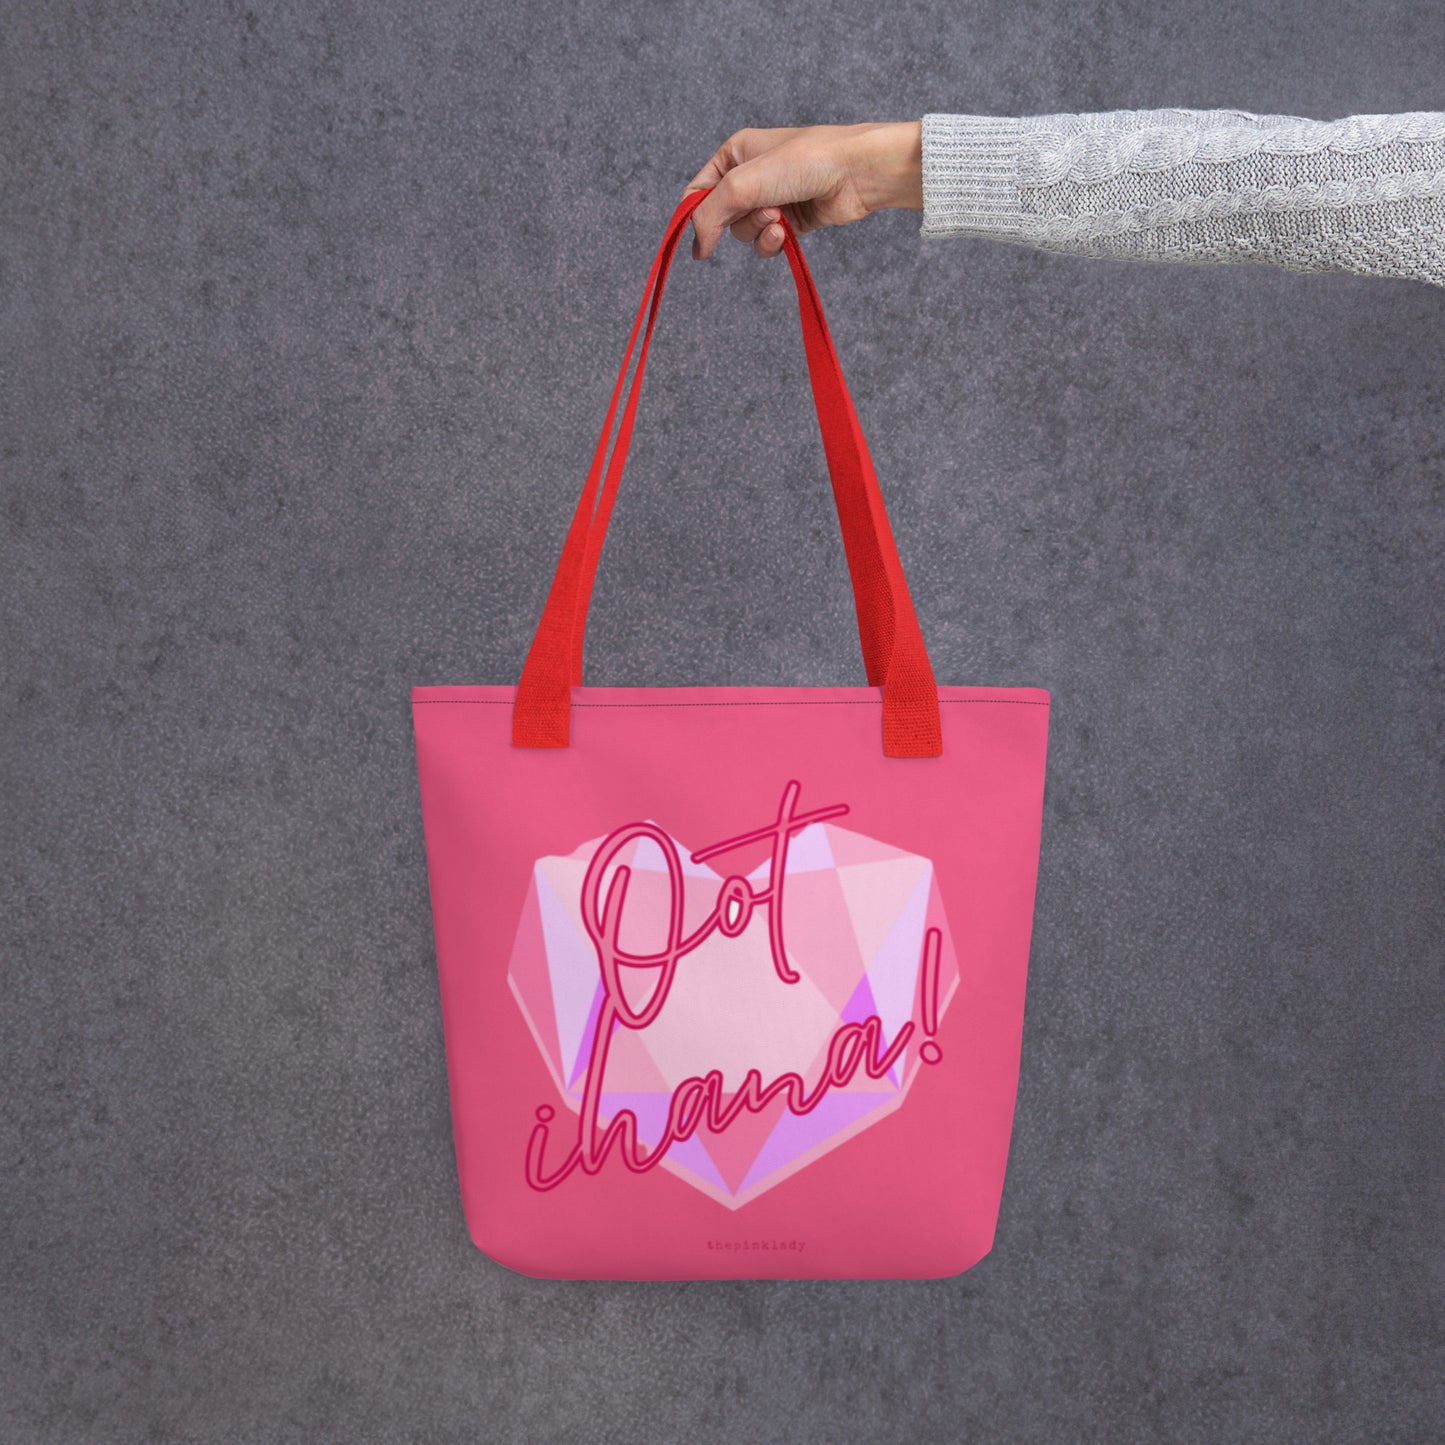 "You are wonderful" fabric bag, pink